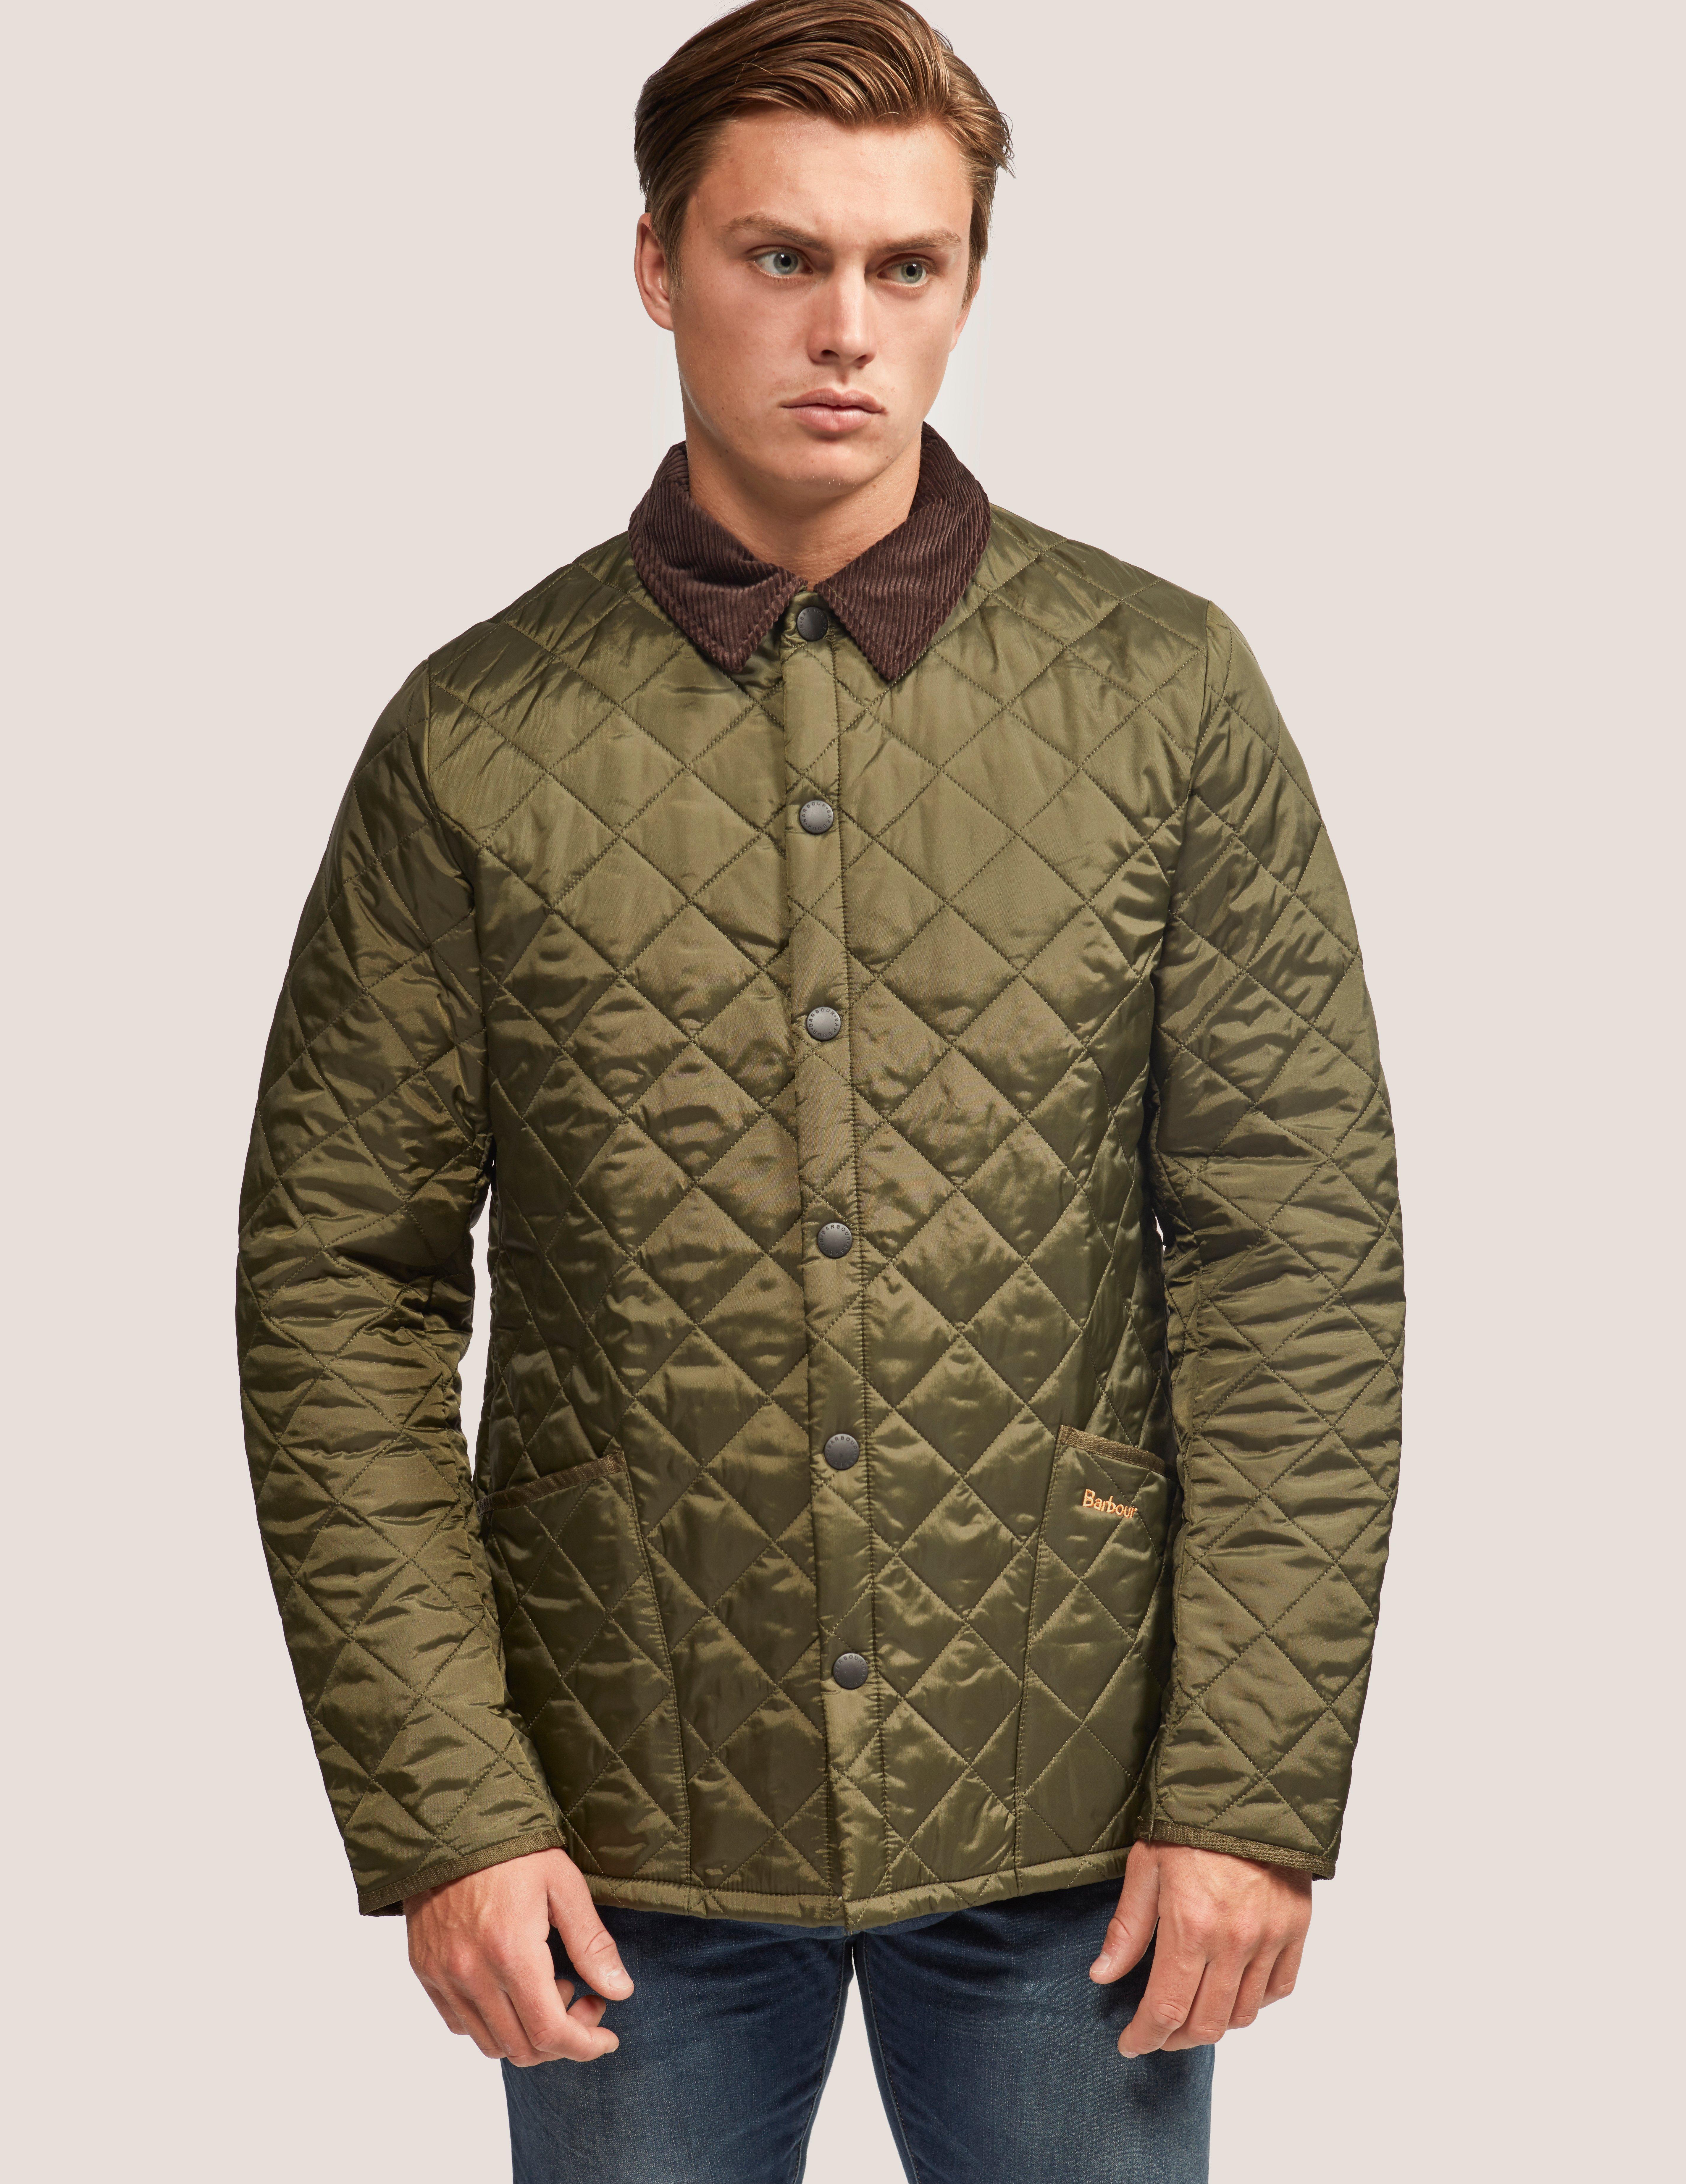 Lyst - Barbour Heritage Liddesdale Olive Quilted Jacket in Green for Men